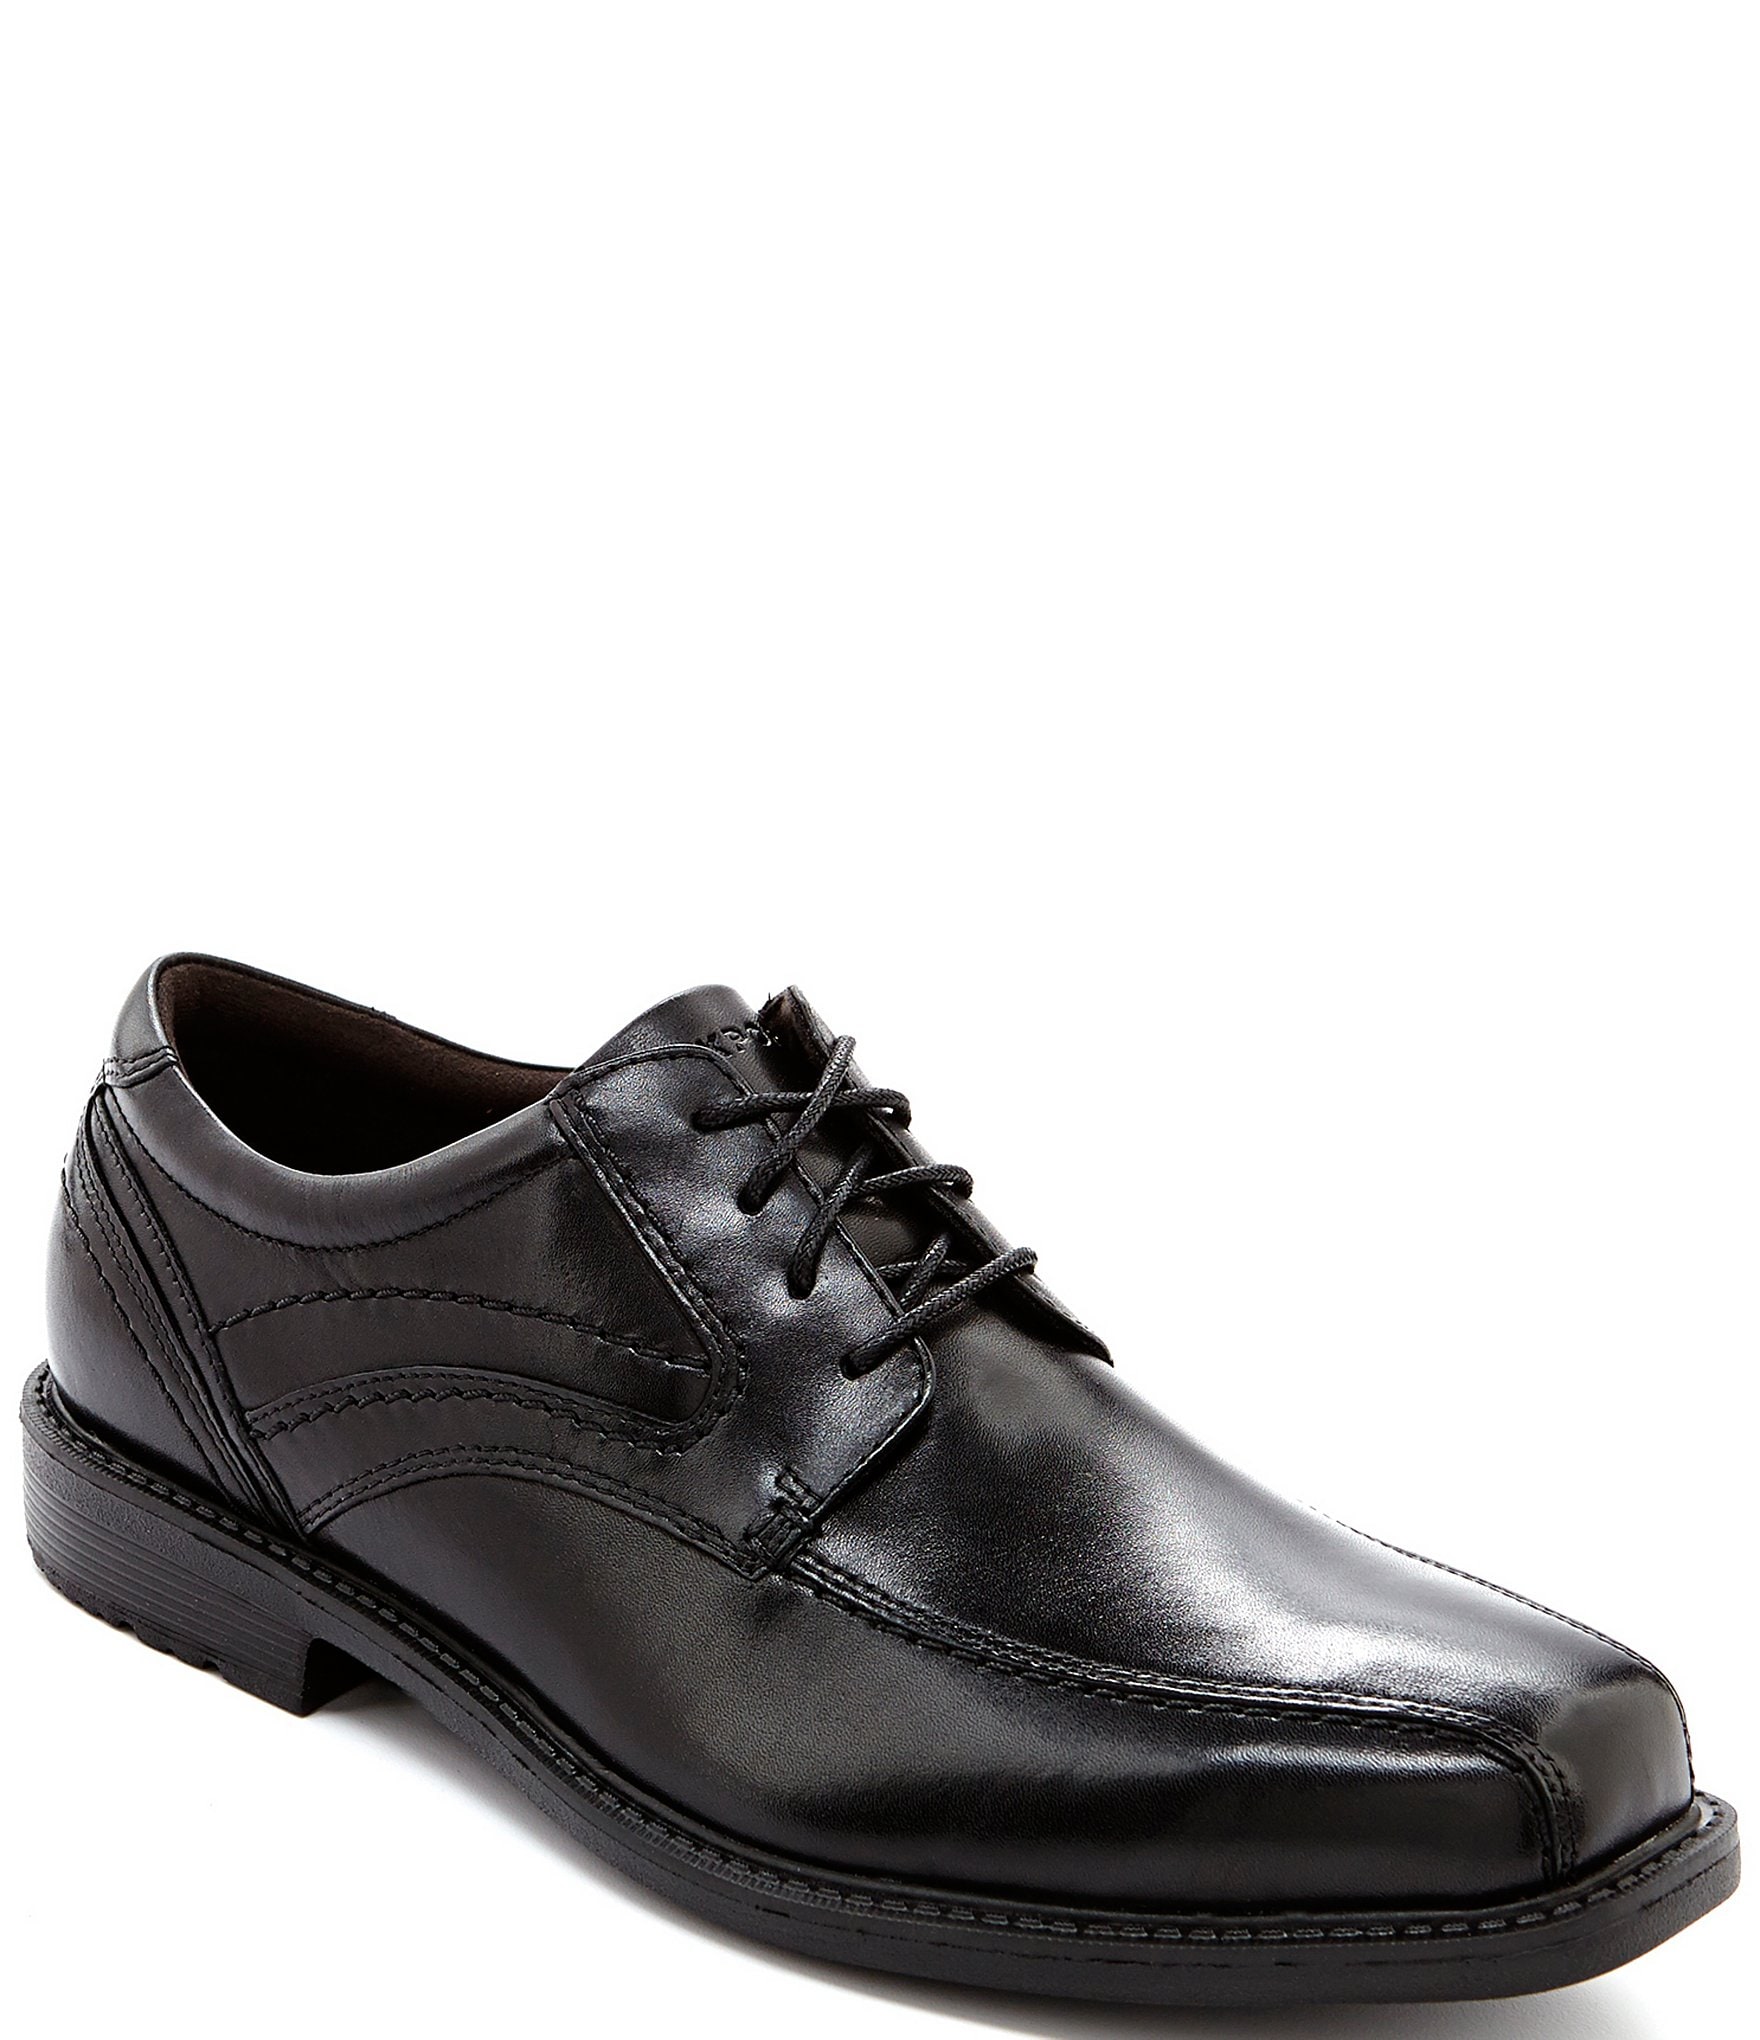 Style Leader 2 Dress Shoes 